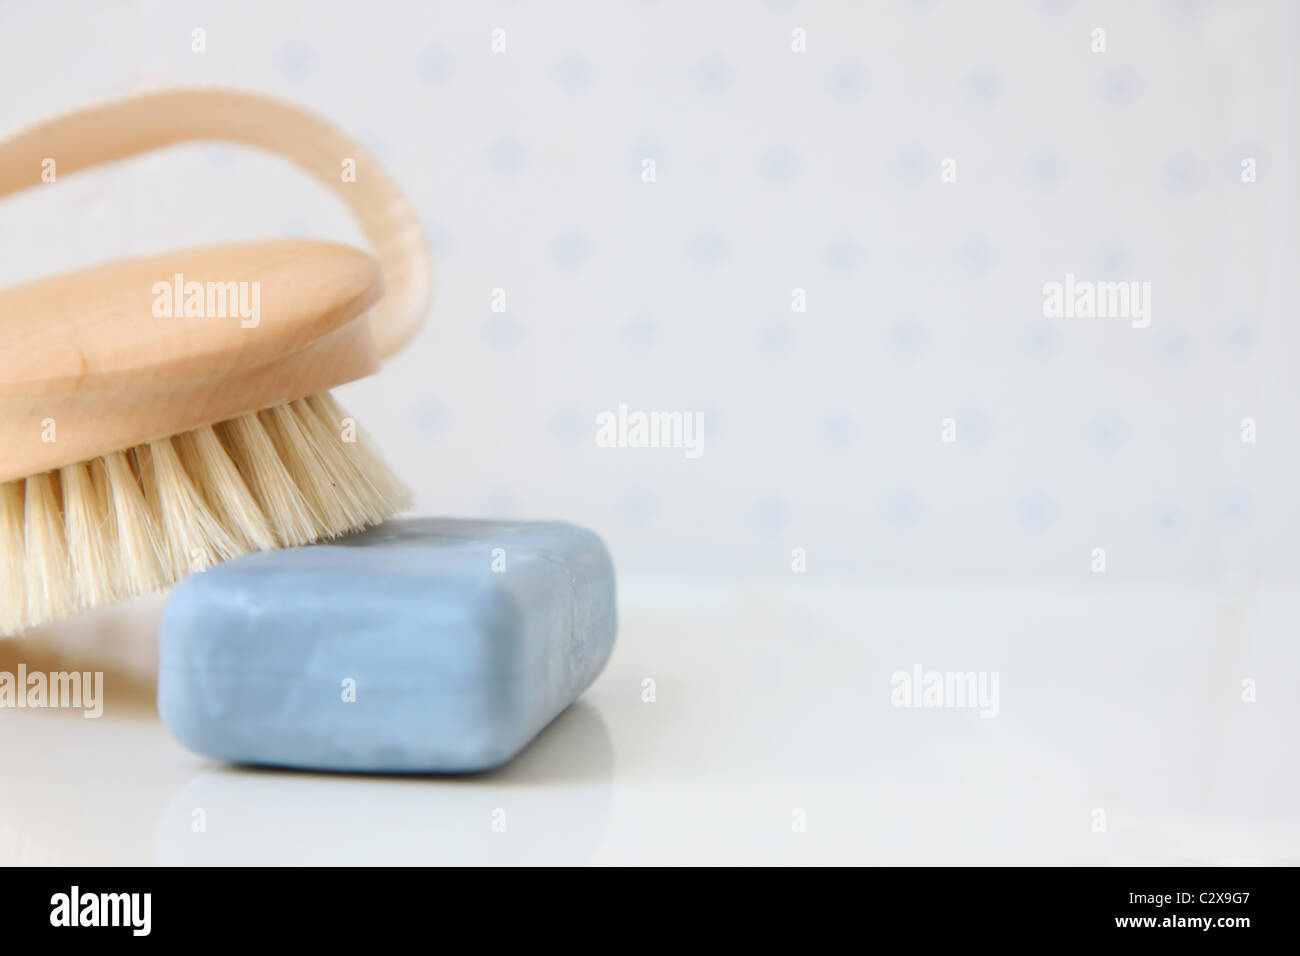 Soap and brush Stock Photo